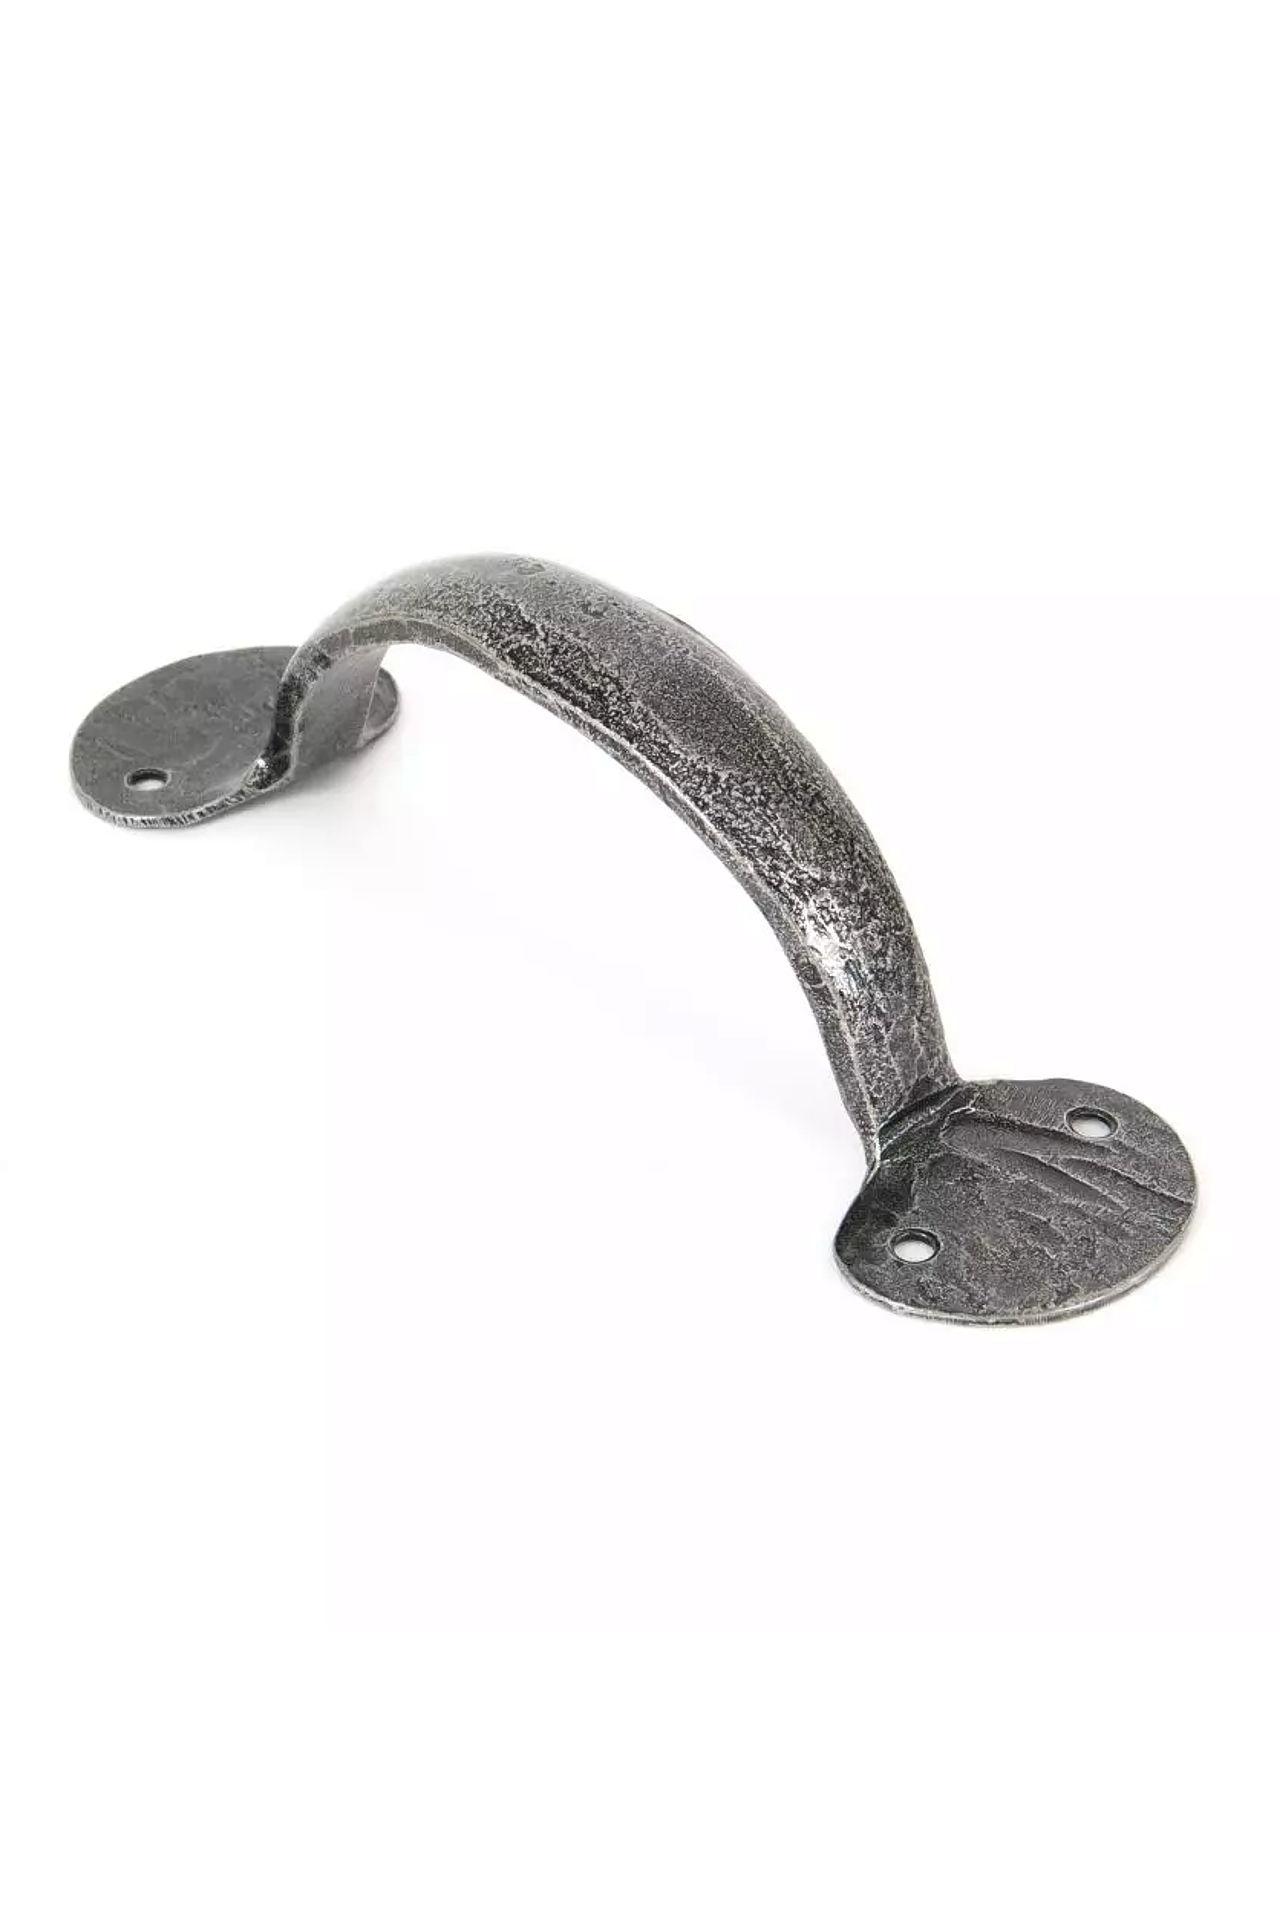 NEW From The Anvil Pewter 6" Bean D Handle #1